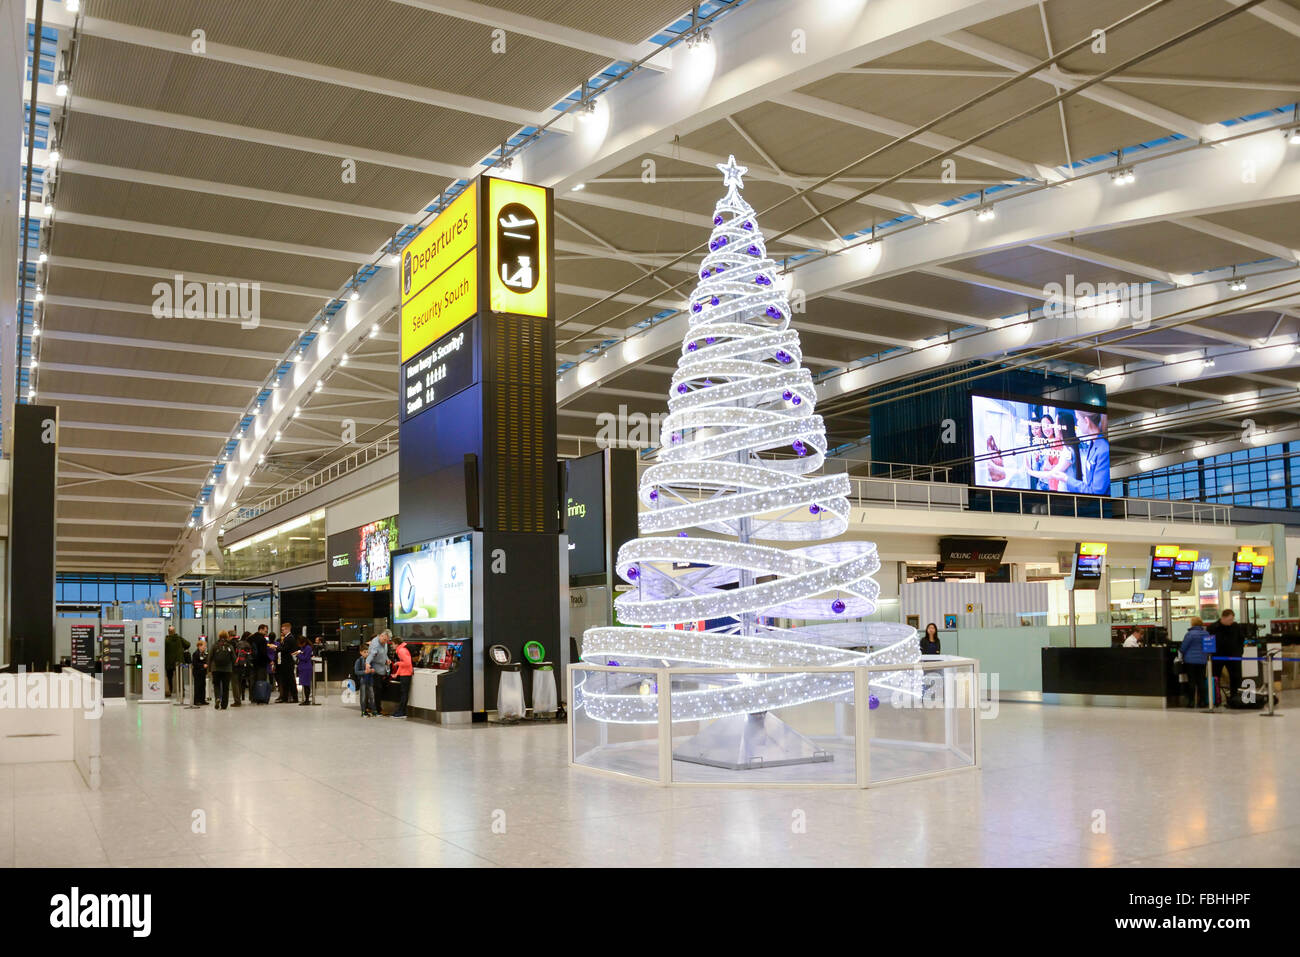 Christmas tree at Departures level, Terminal 5, Heathrow Airport. Hounslow, Greater London, England, United Kingdom Stock Photo